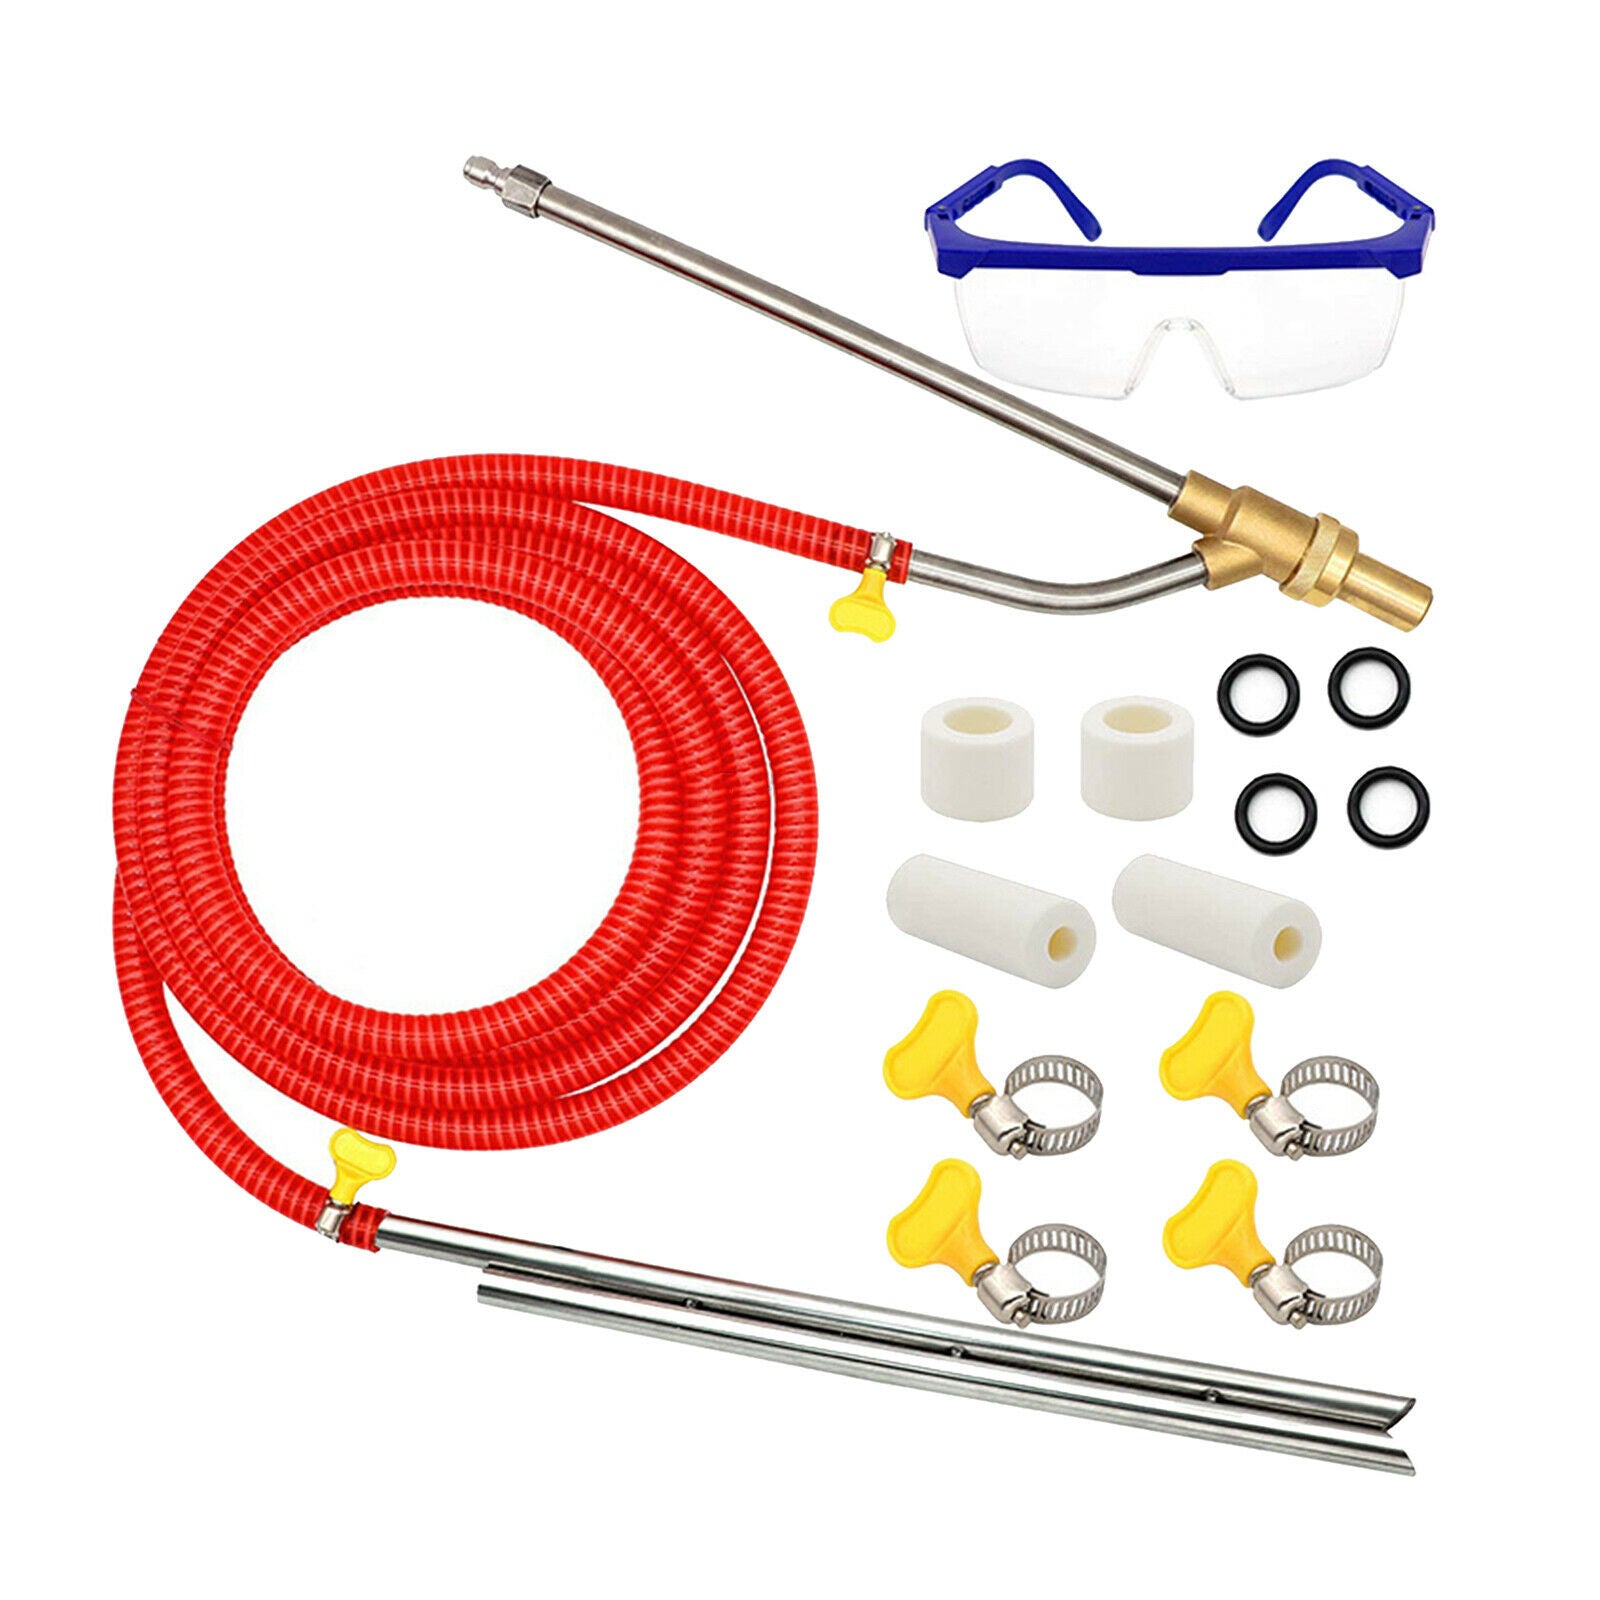 Pressure Washer Sandblasting Kit Wet 5000 PSI, with 1/4inch Quick Disconnect,